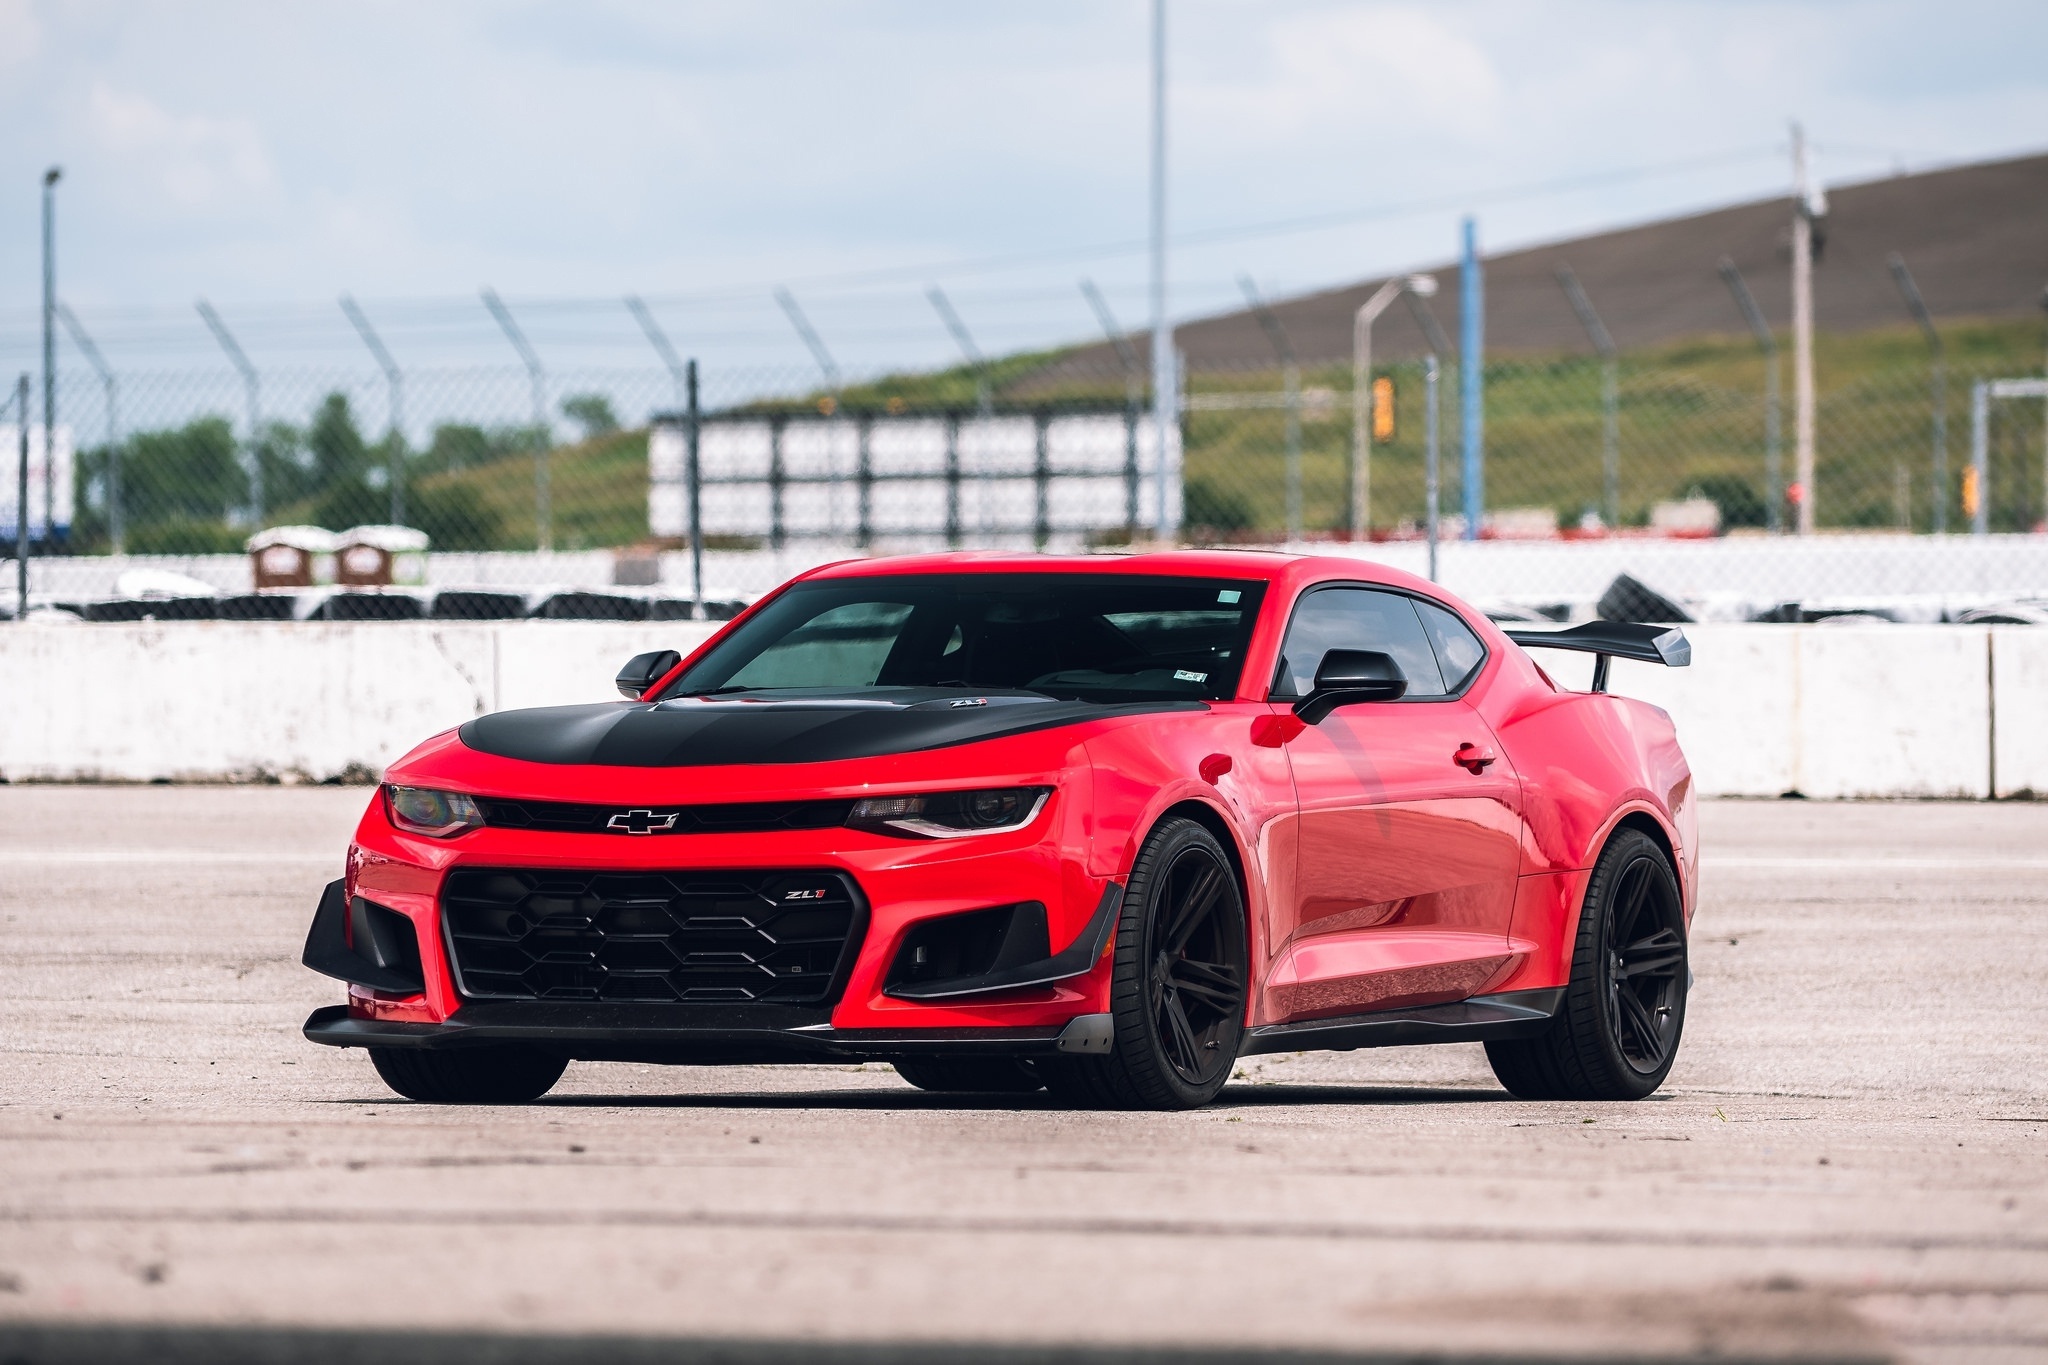 Chevrolet Camaro ZL1 wallpapers, High-quality HD pictures, Customize your smartphone, Stunning visuals, Free download, 2050x1370 HD Desktop